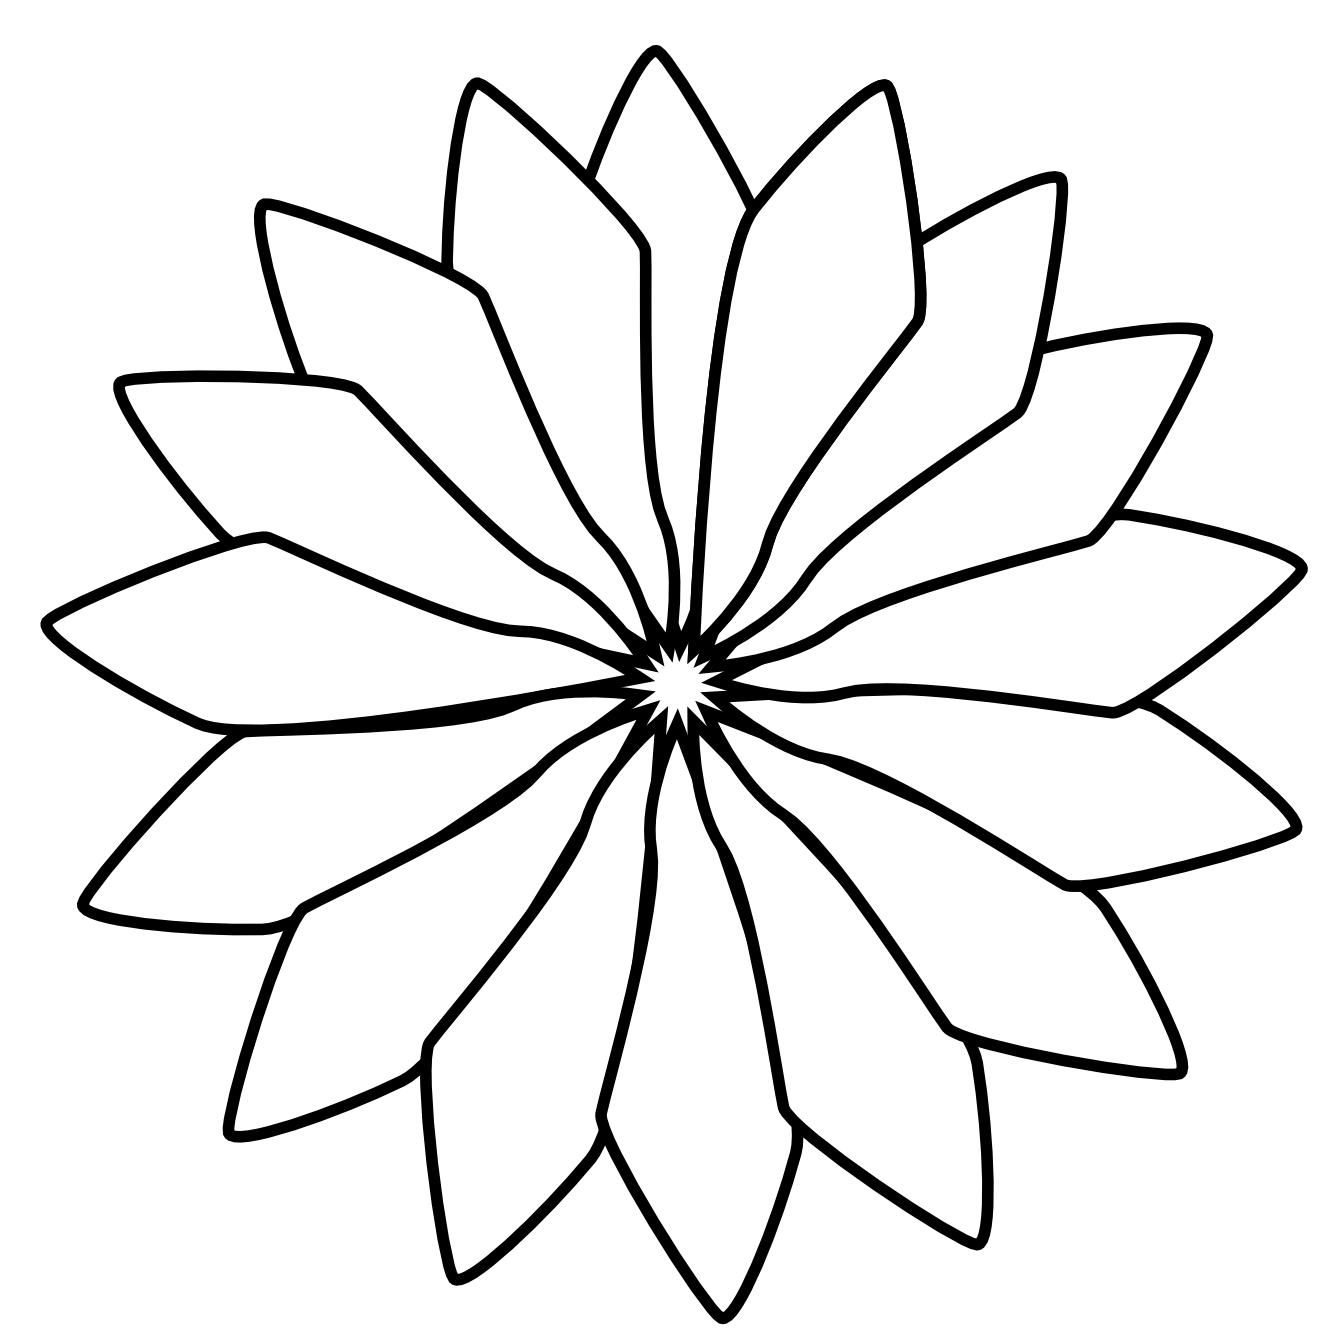 Clip Arts Related To : sunflower clipart black and white png. view al...